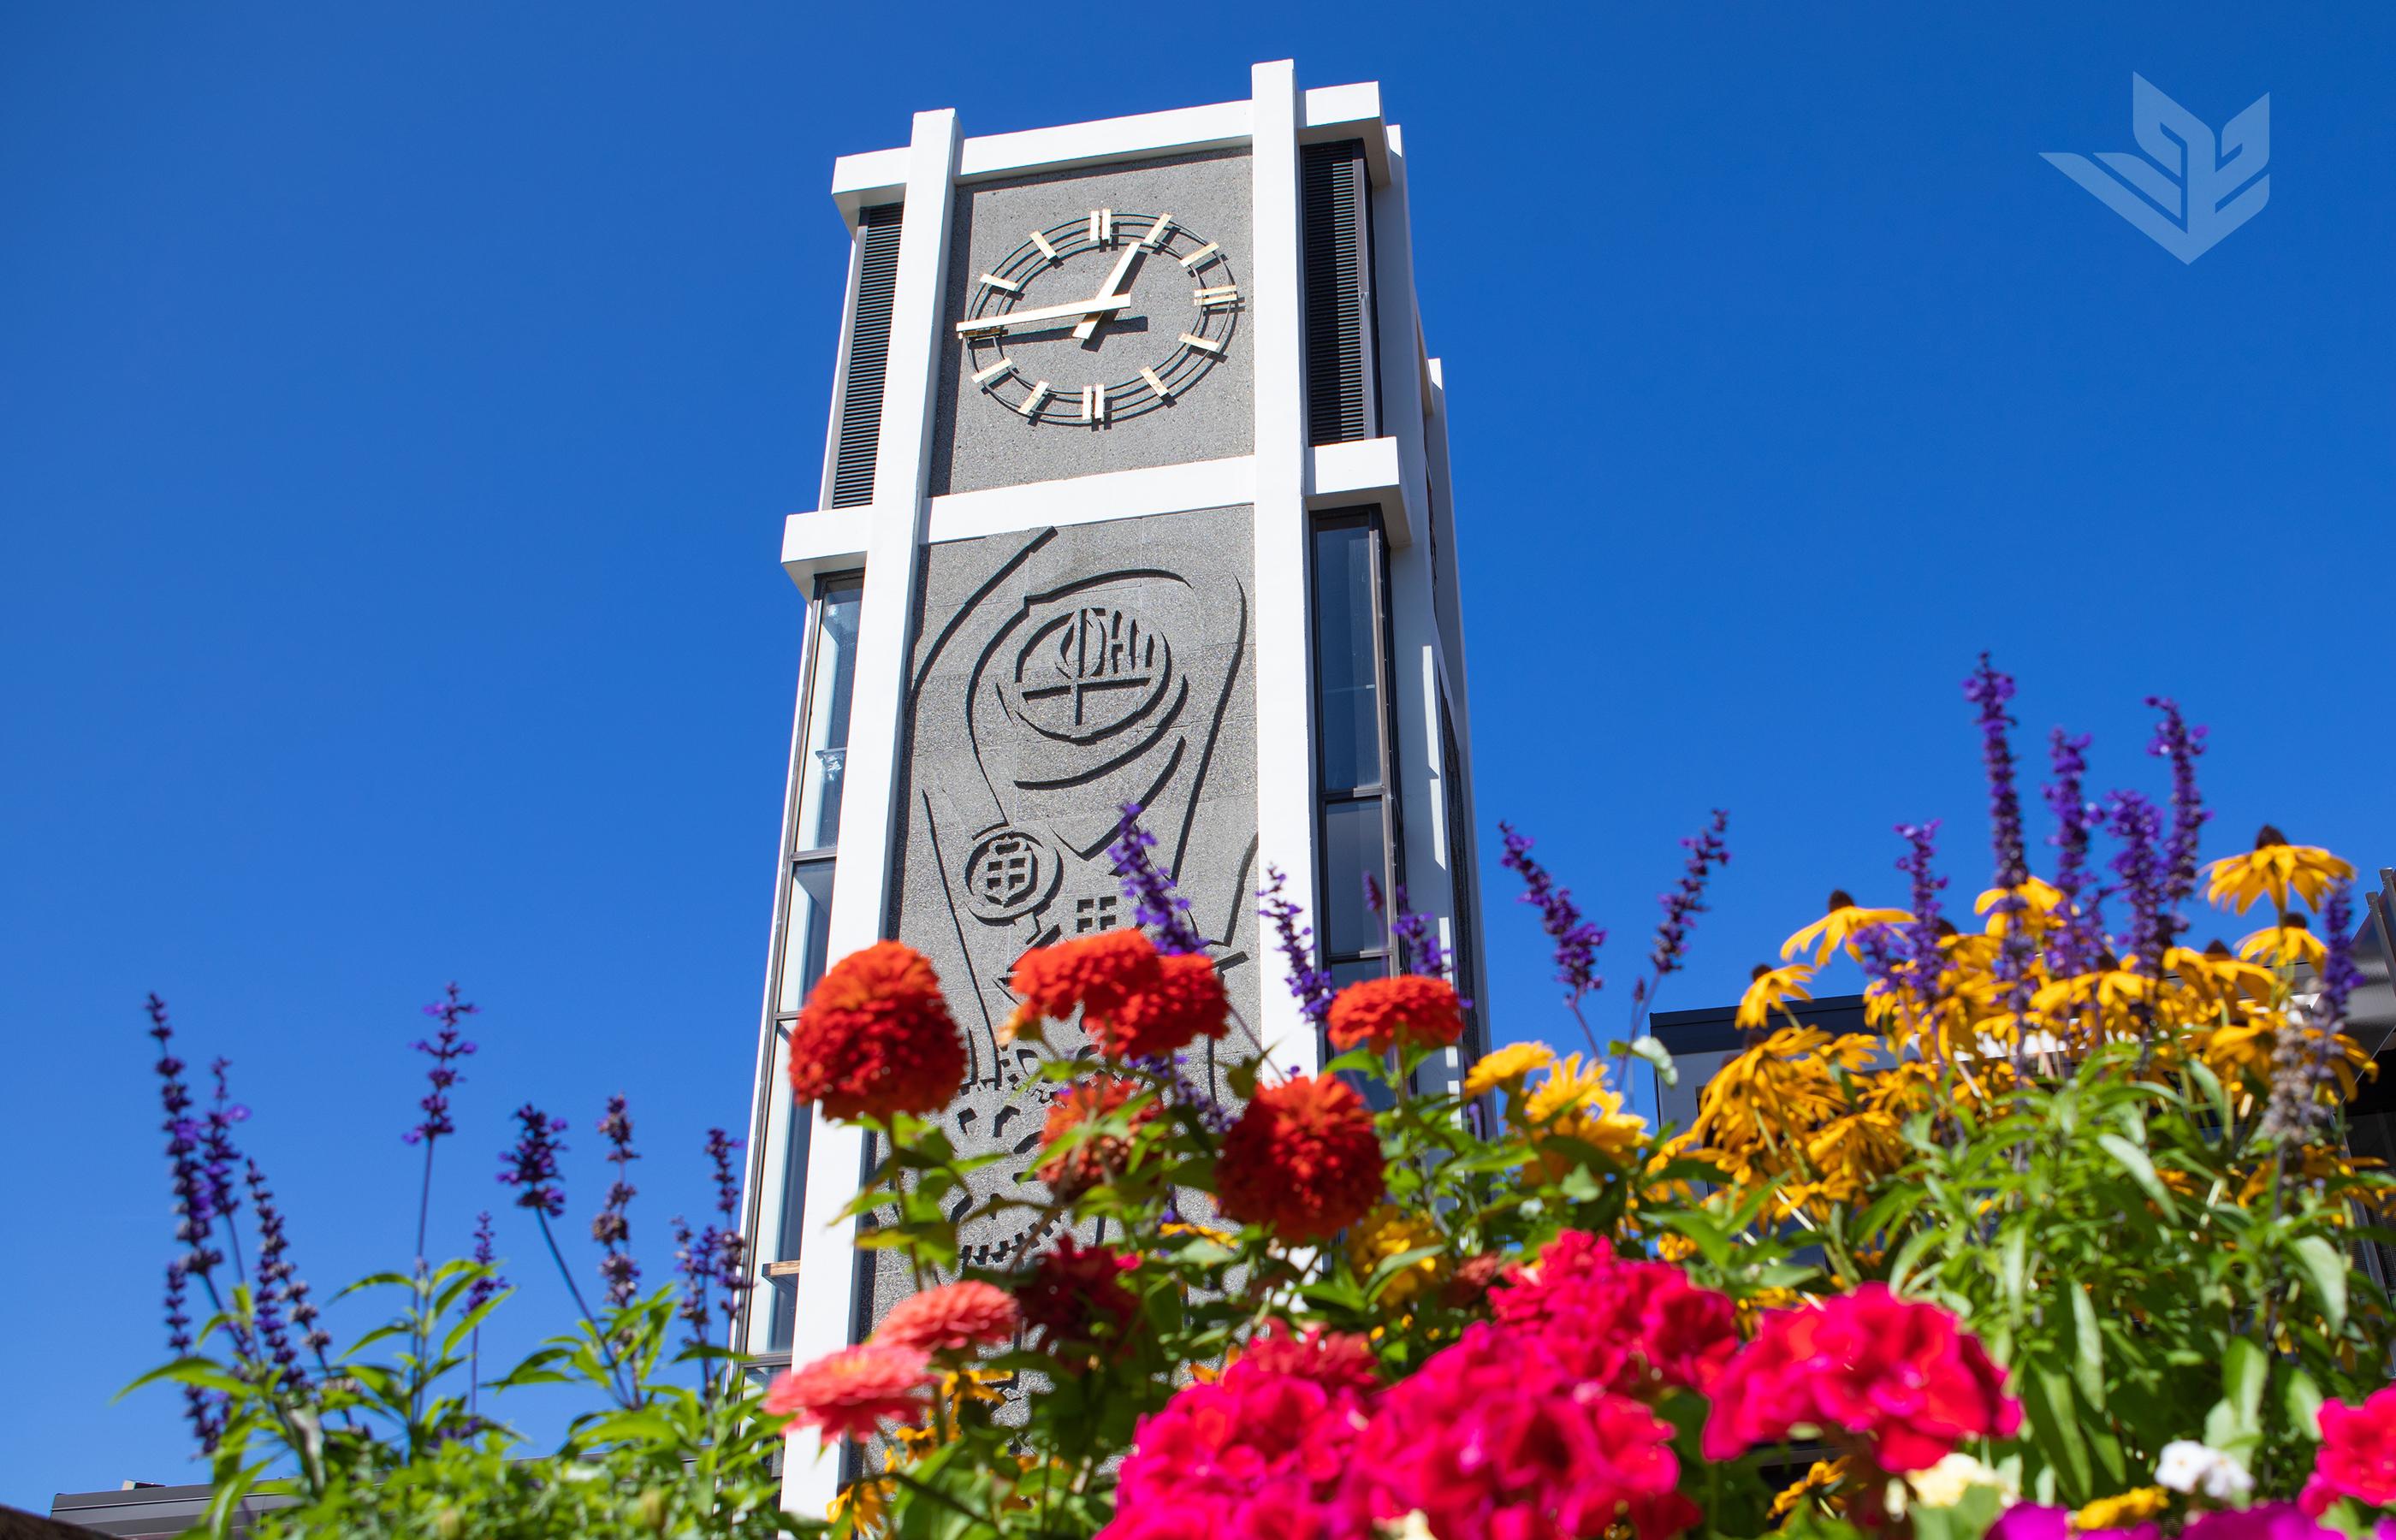 The iconic Demaray Hall clocktower behind summer flowers and in front of a cloudless blue sky